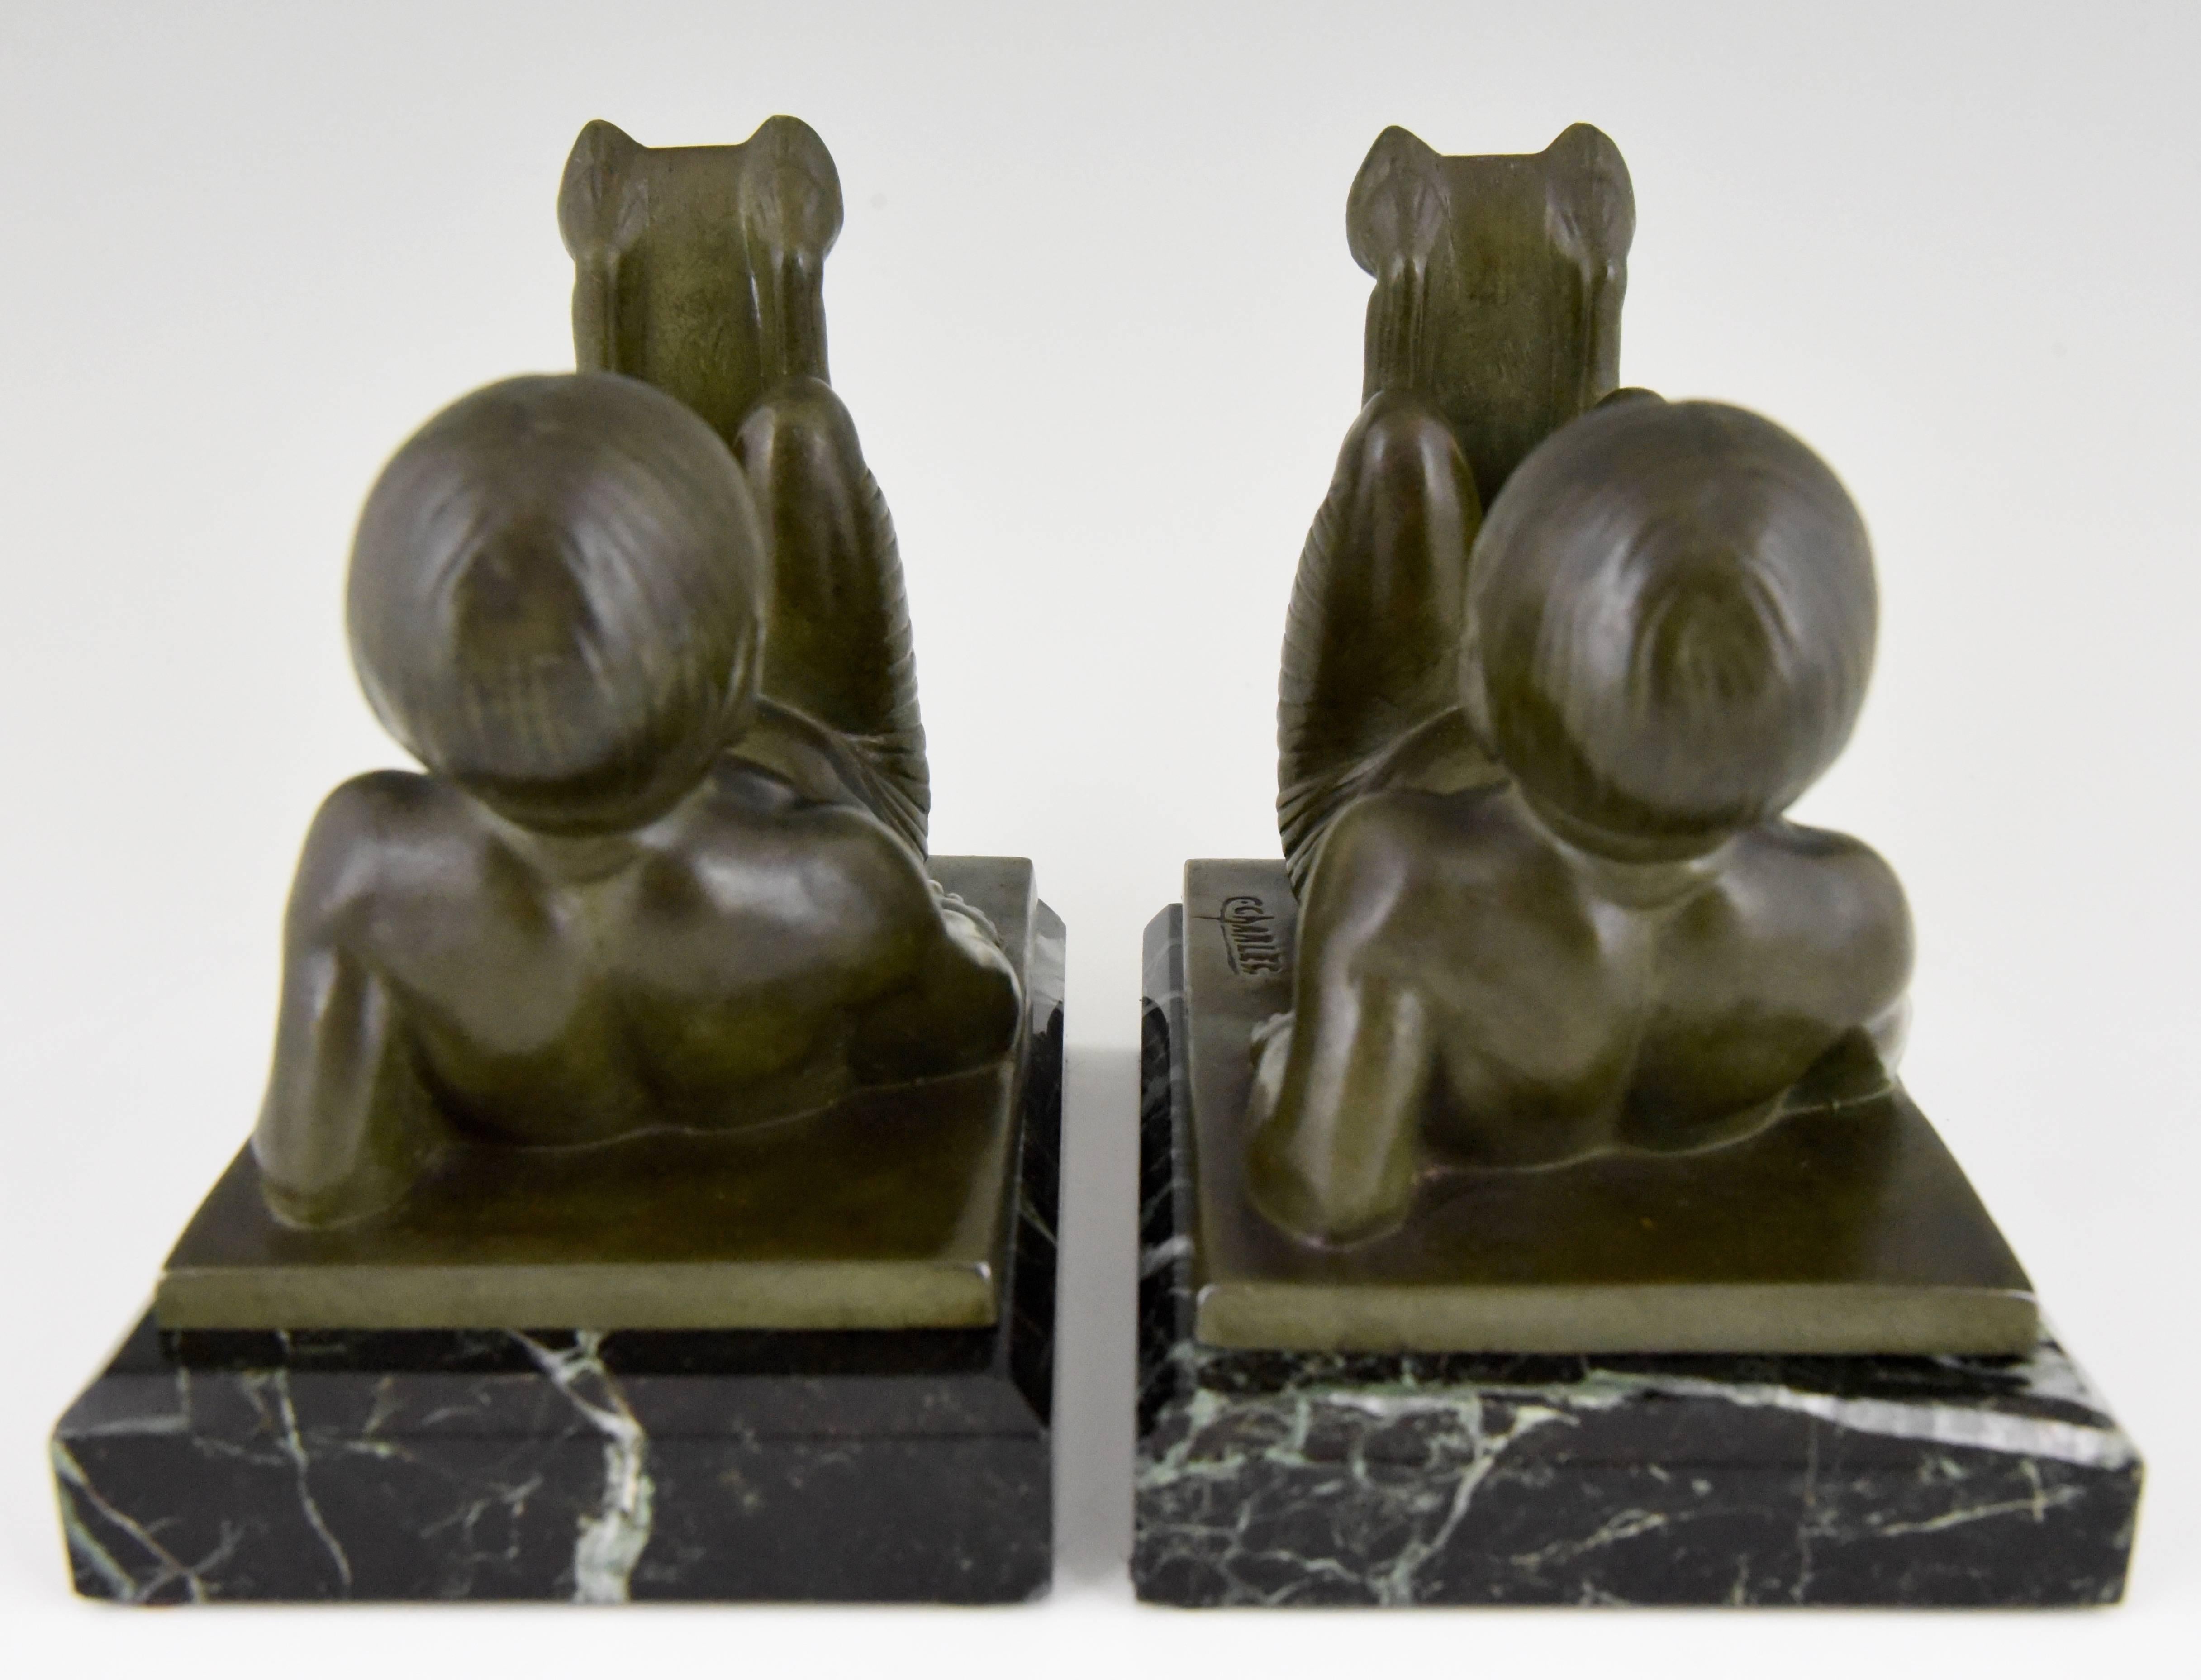 French Art Deco Bookends with Young Satyrs by C. Charles  France  1930